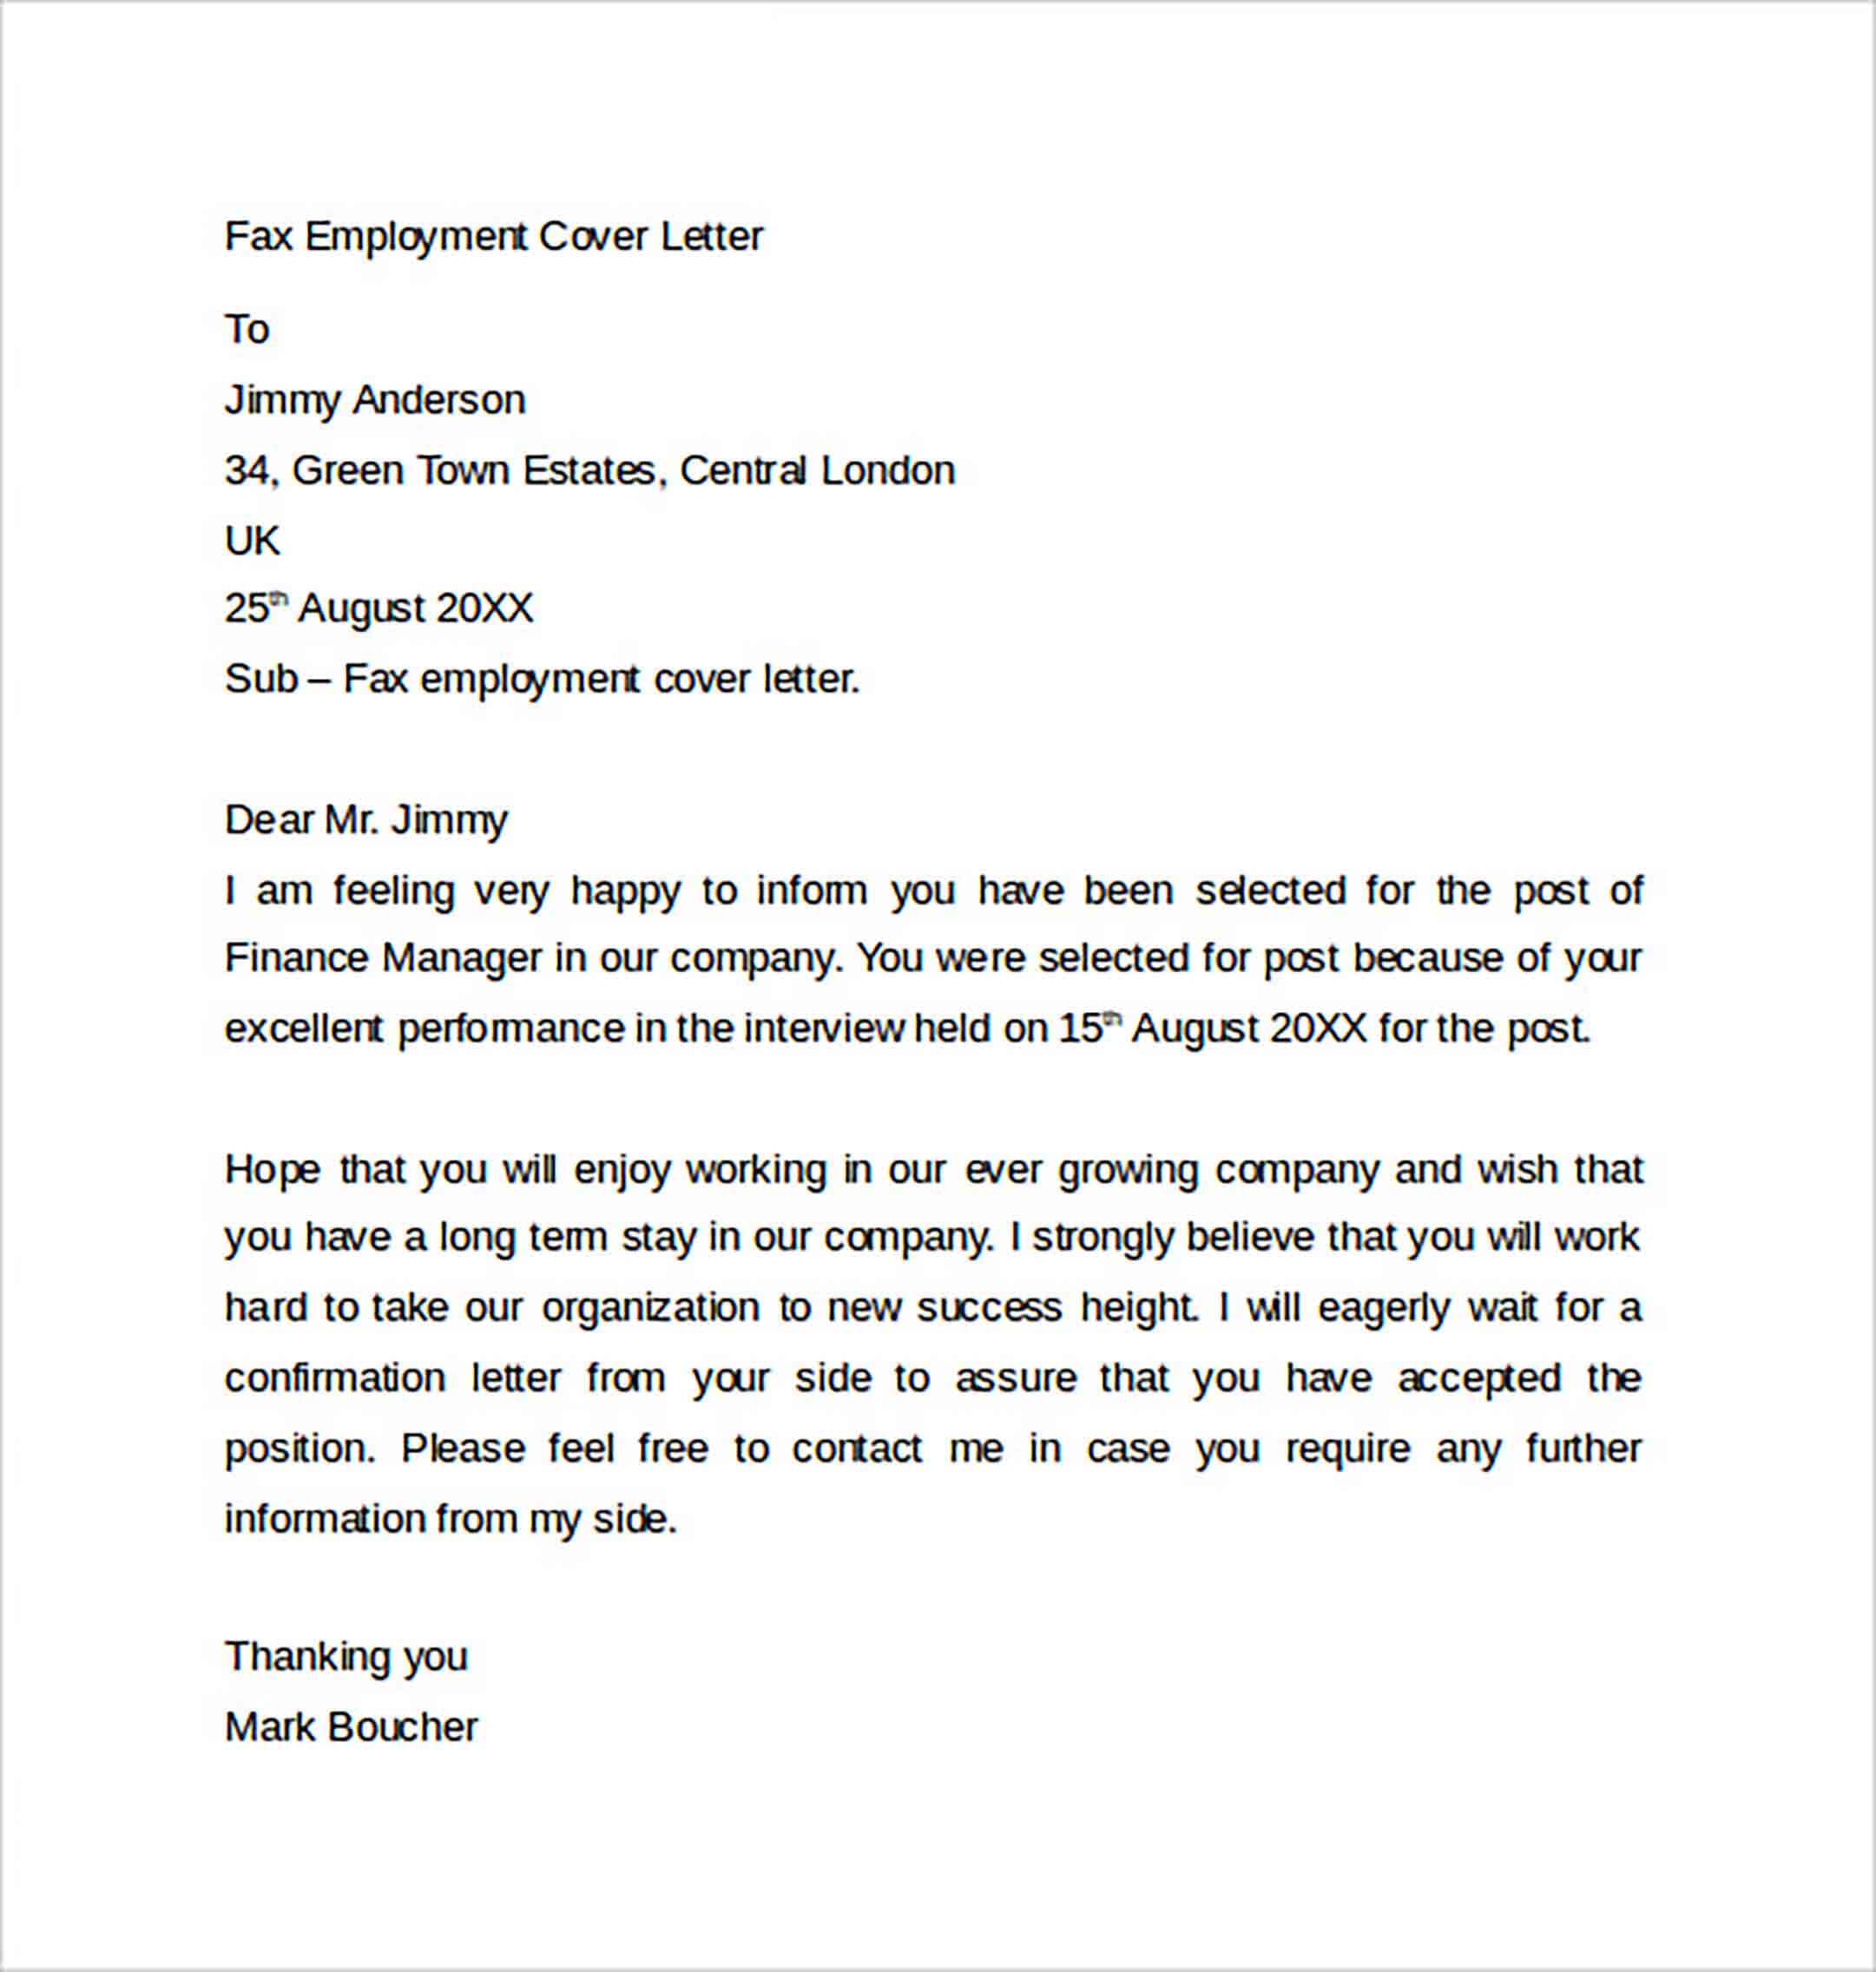 Simple Fax Cover Letter